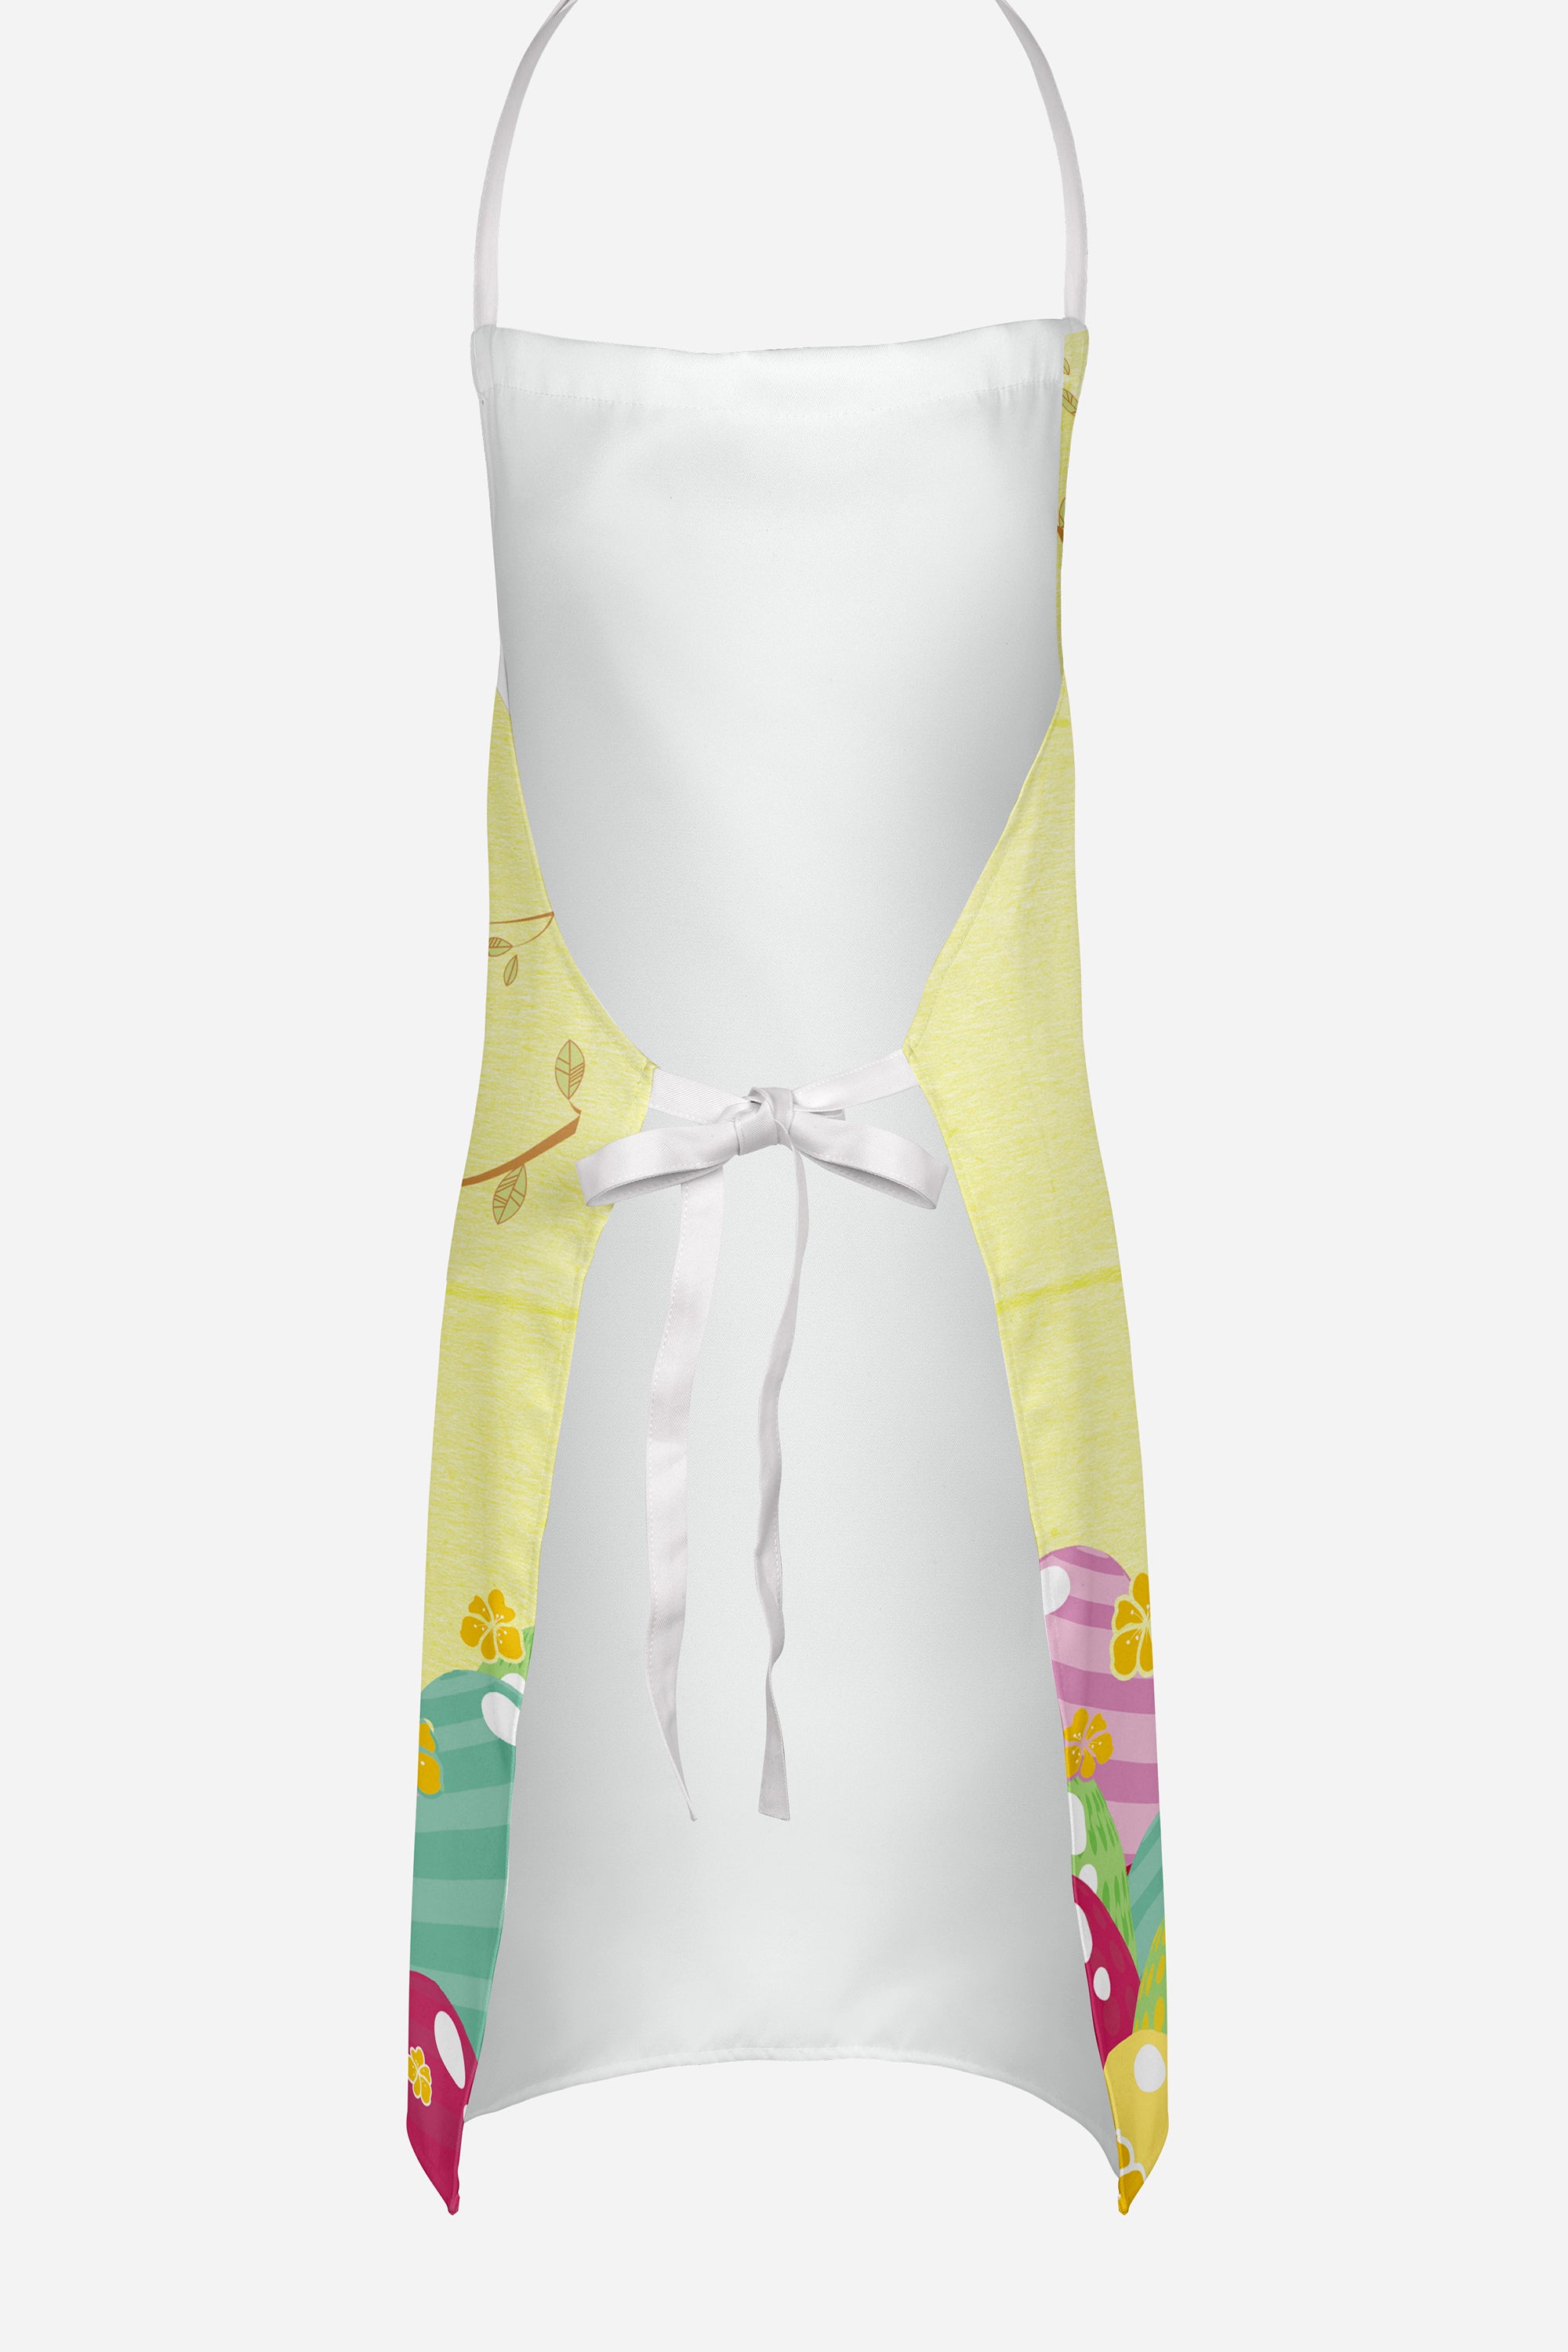 Easter Eggs Great Pyrenese Apron BB6083APRON  the-store.com.